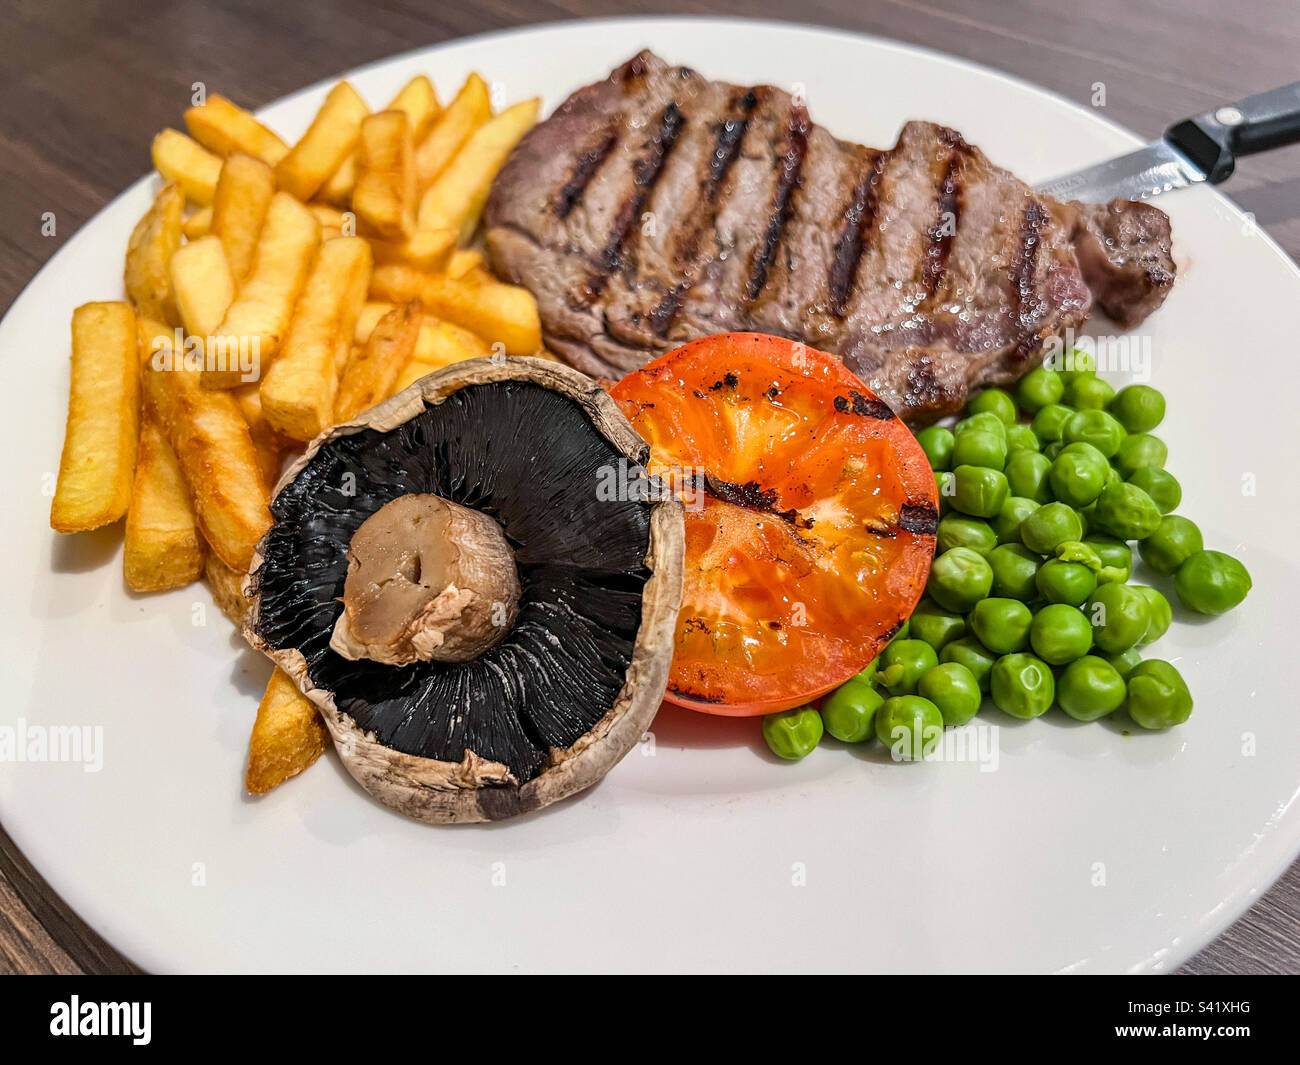 Sirloin steak and fries meal Stock Photo